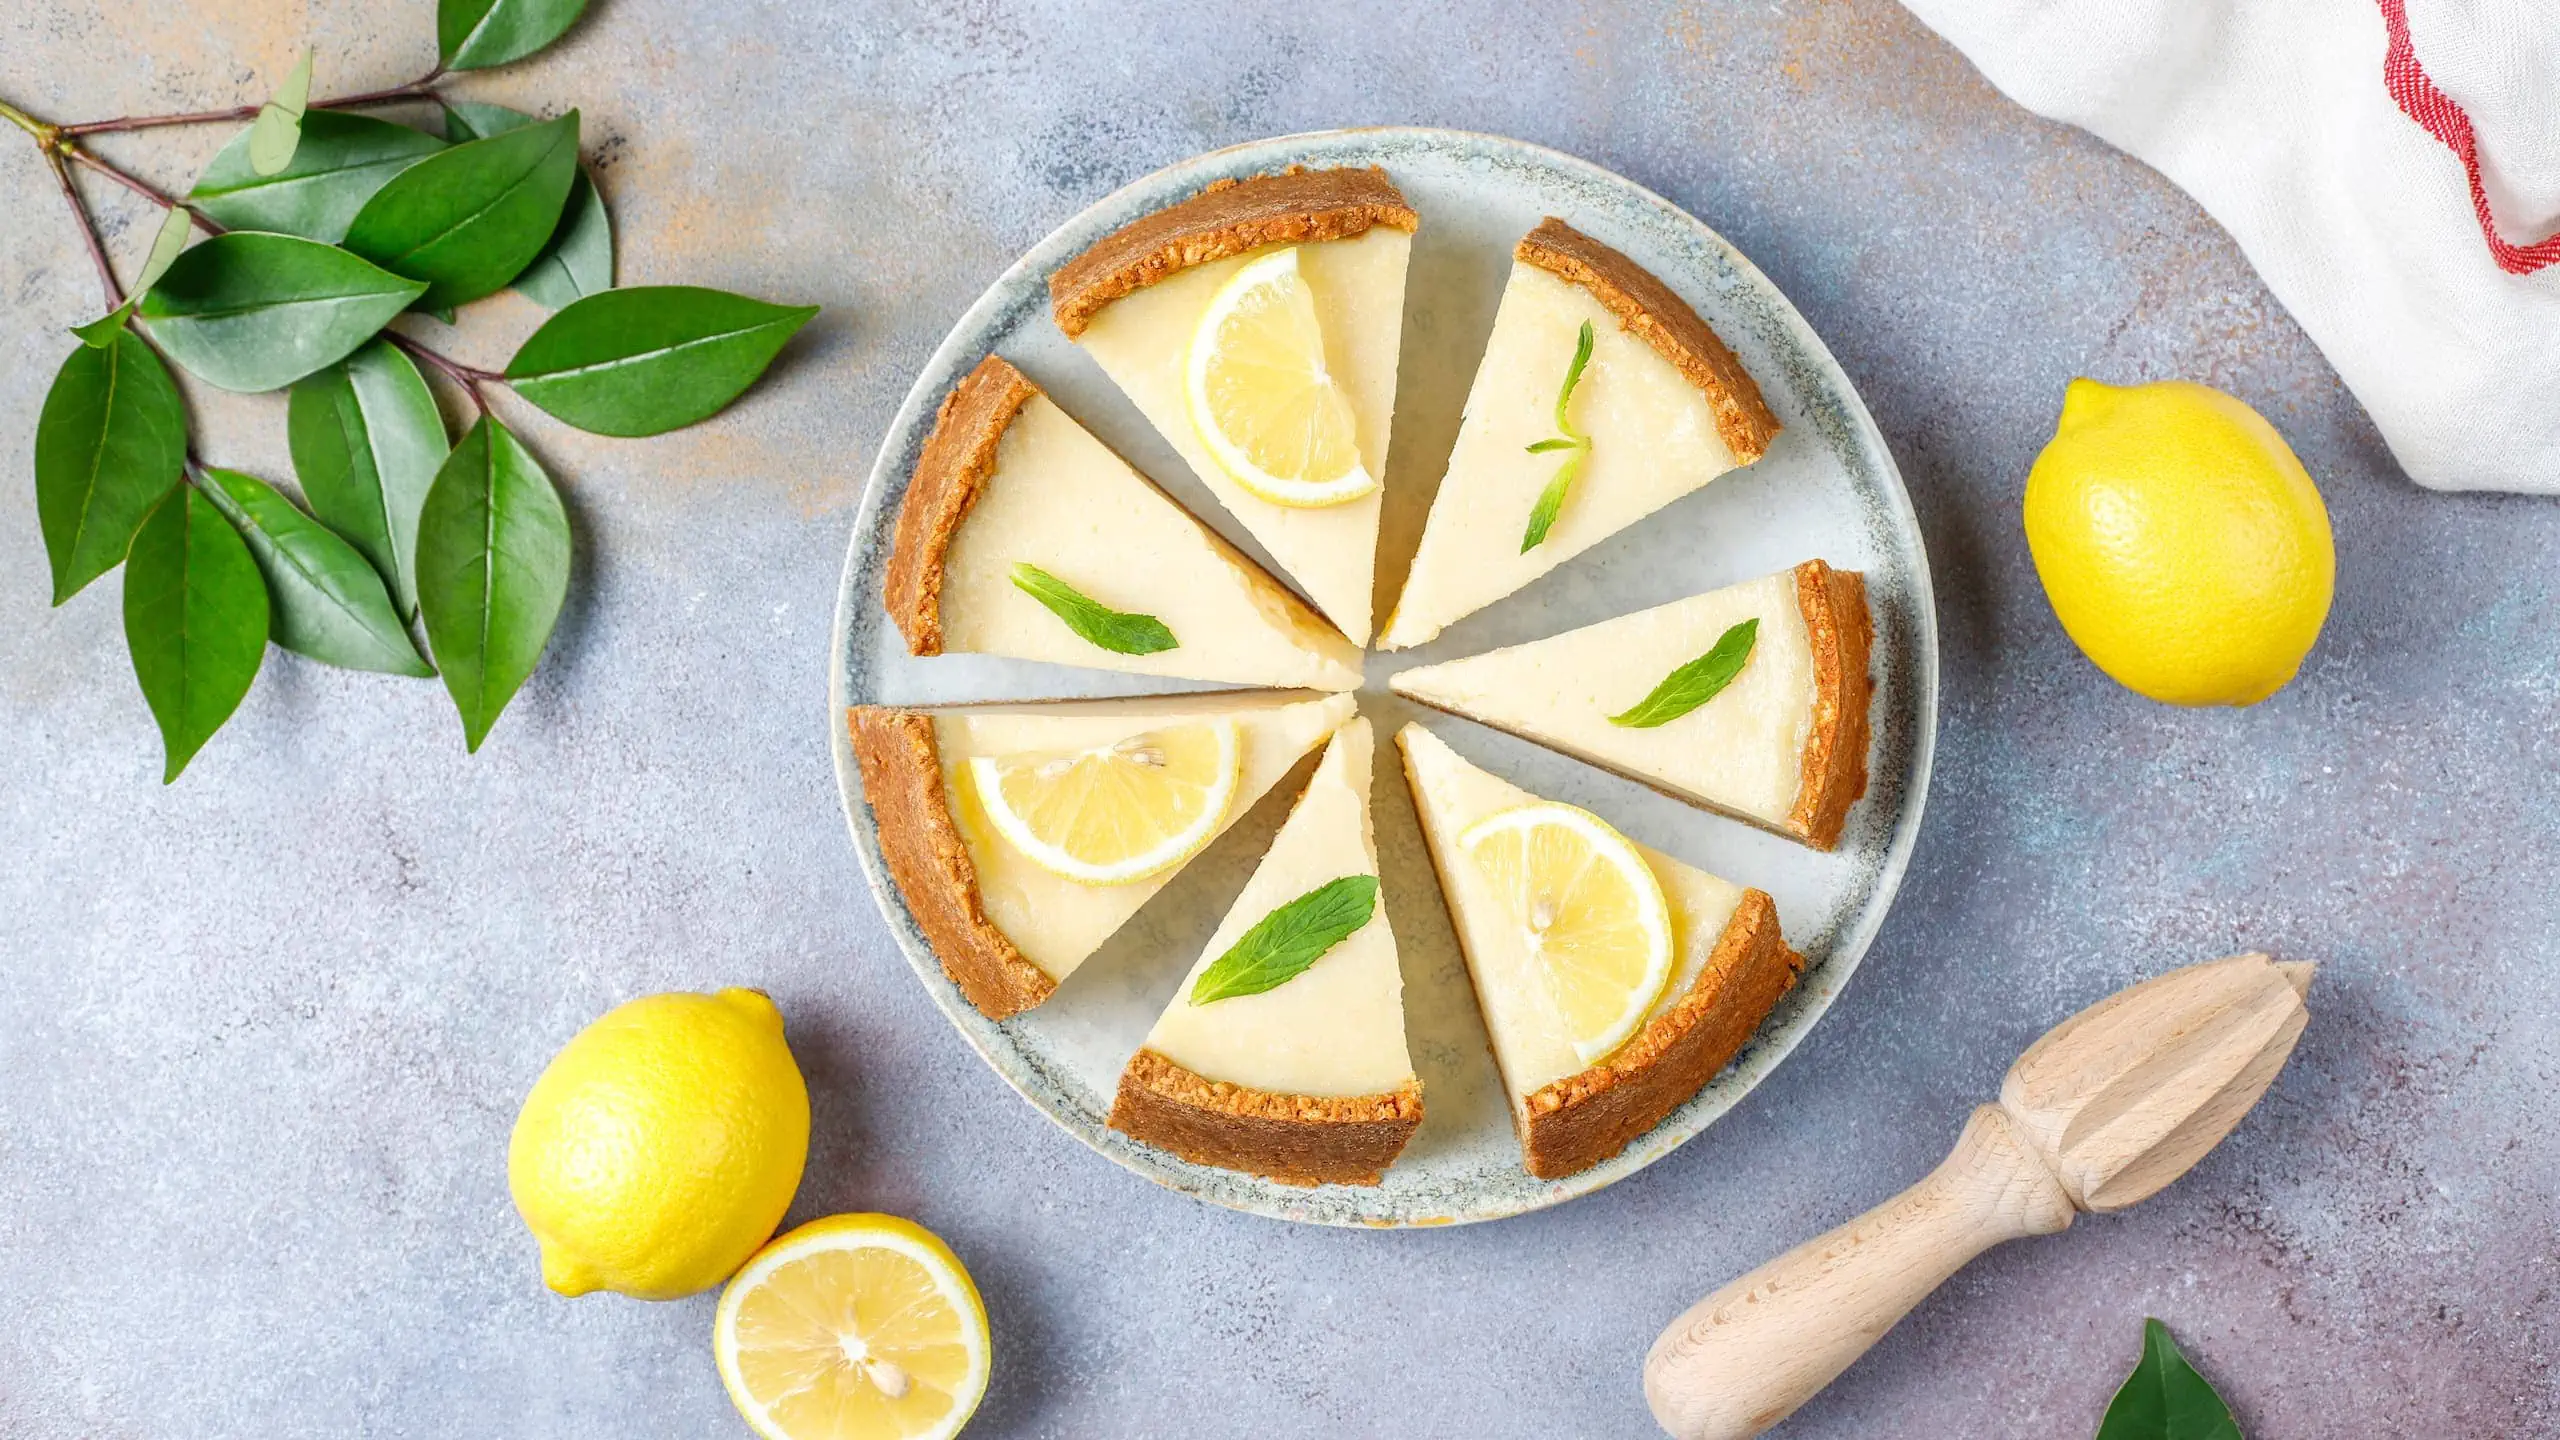 Homemade Kermit's key lime pie with lemon and mint